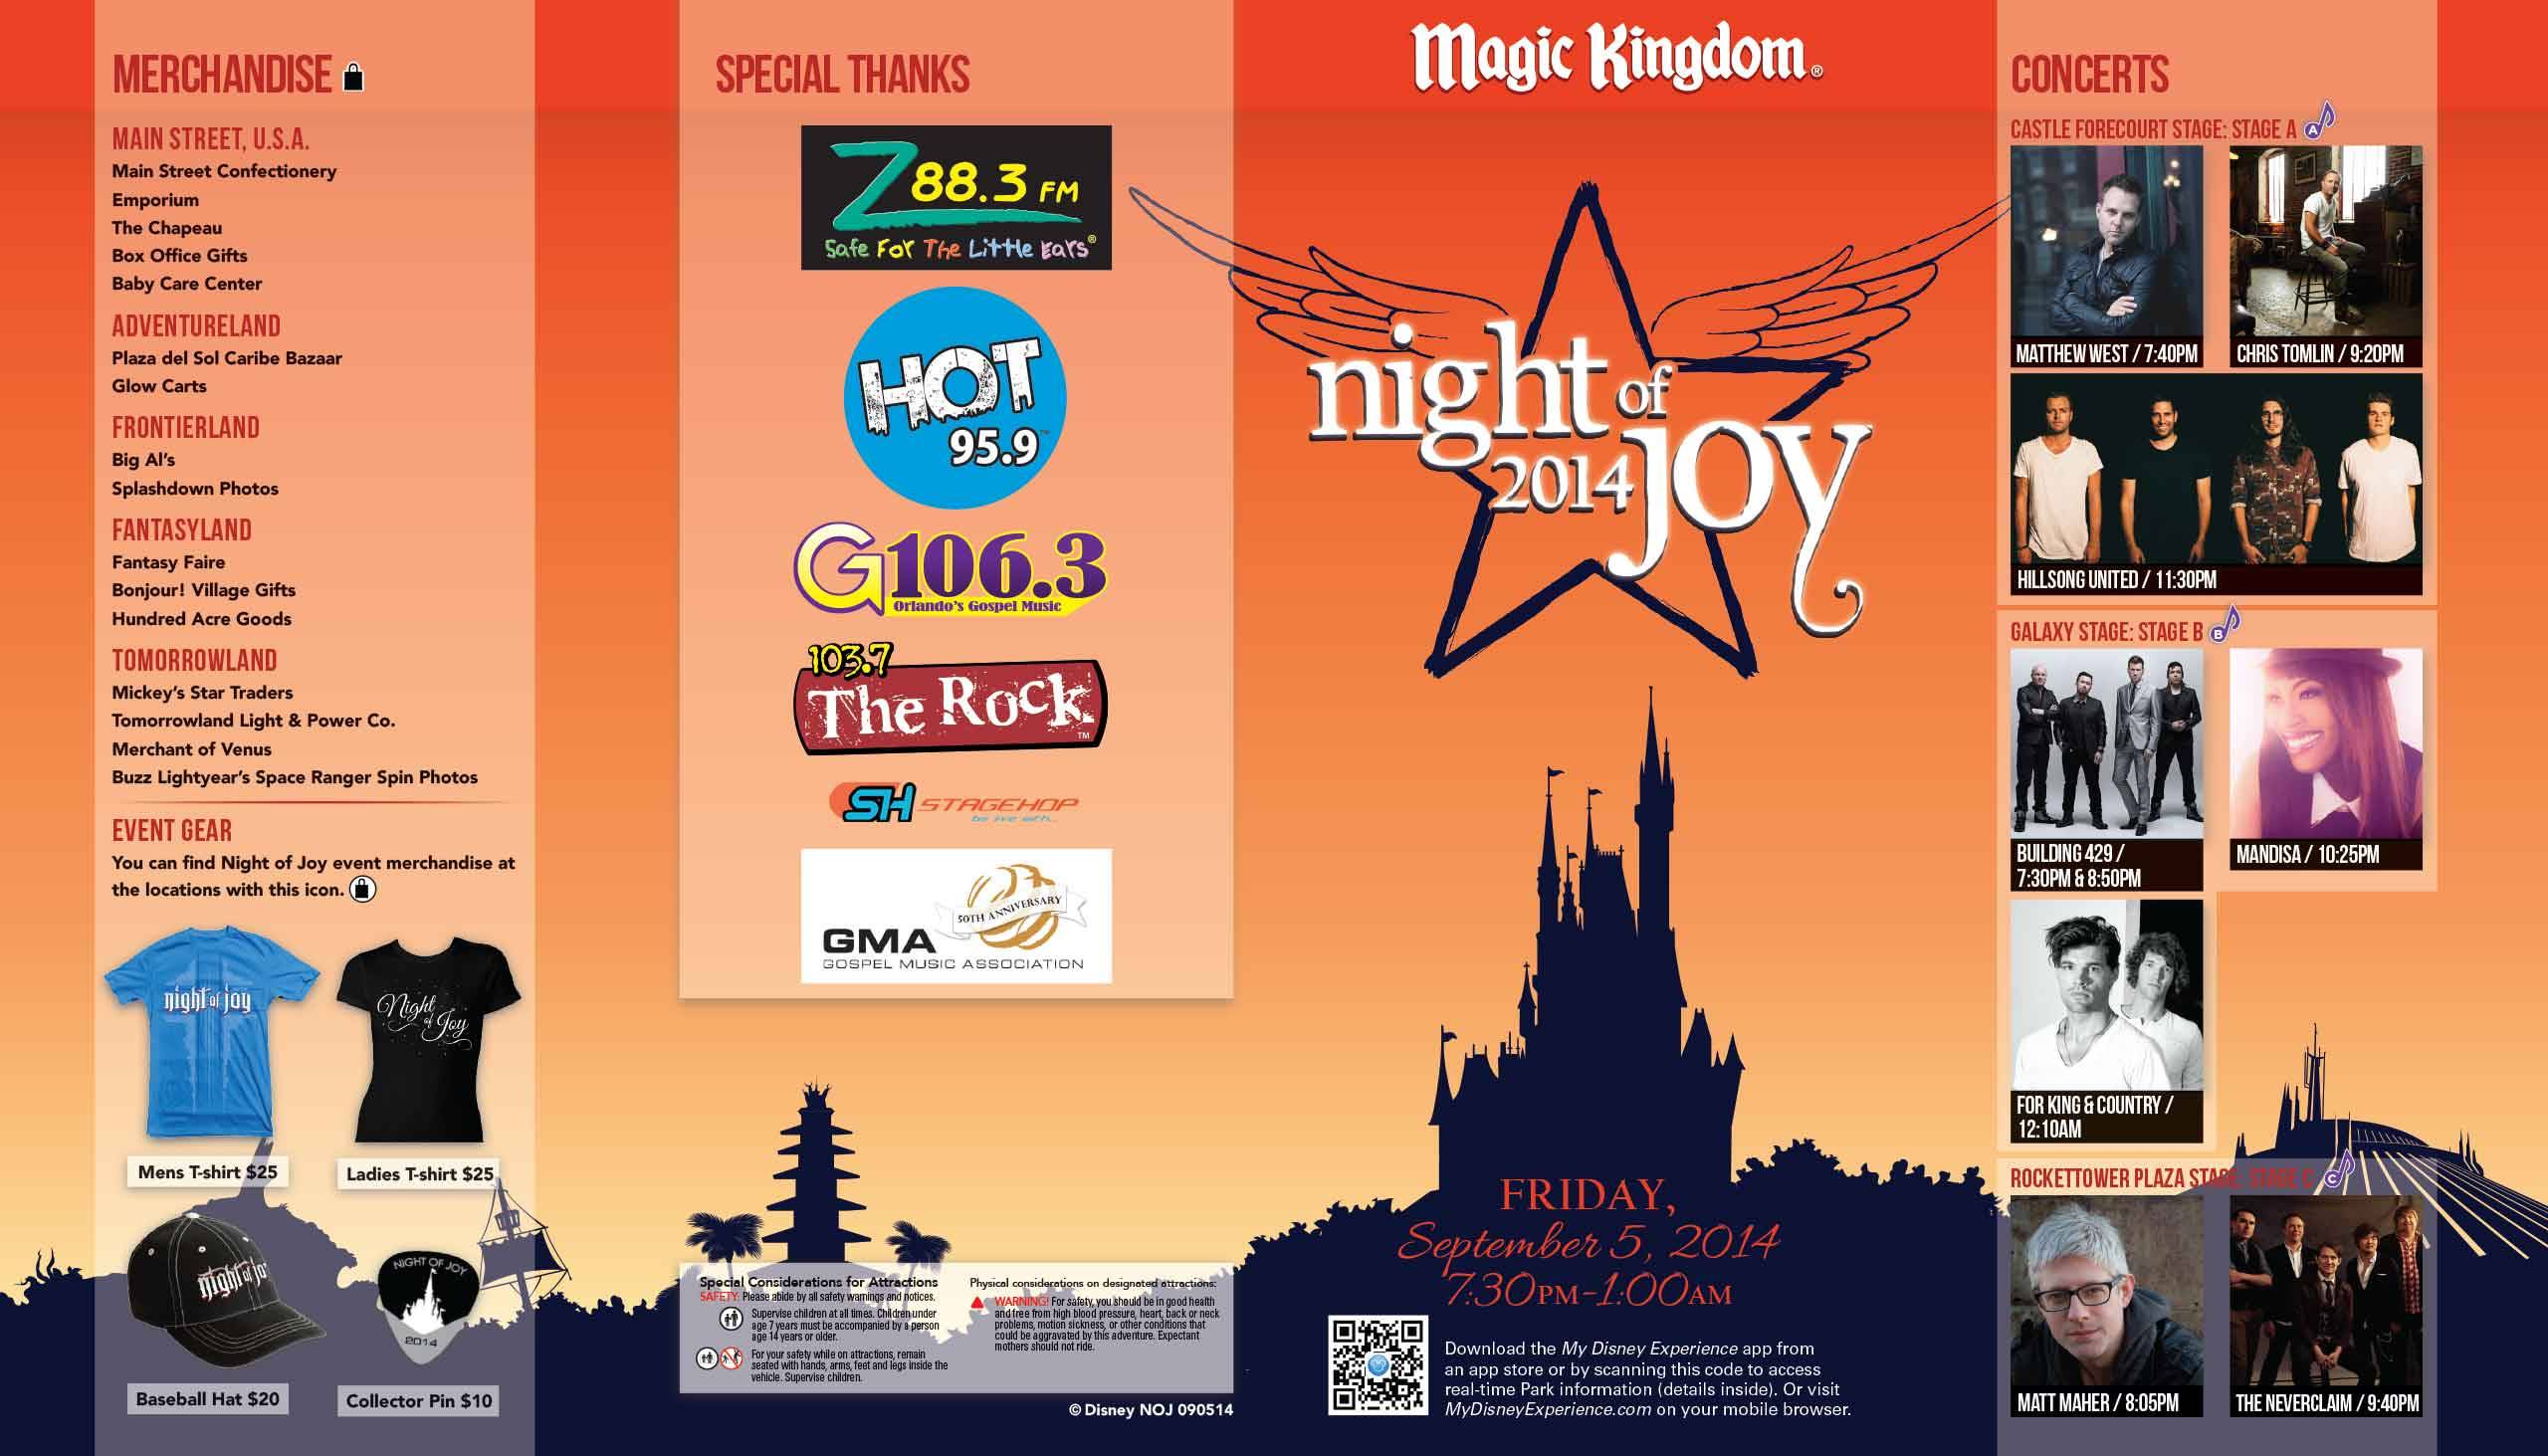 PHOTOS - Night of Joy Guide Maps now available